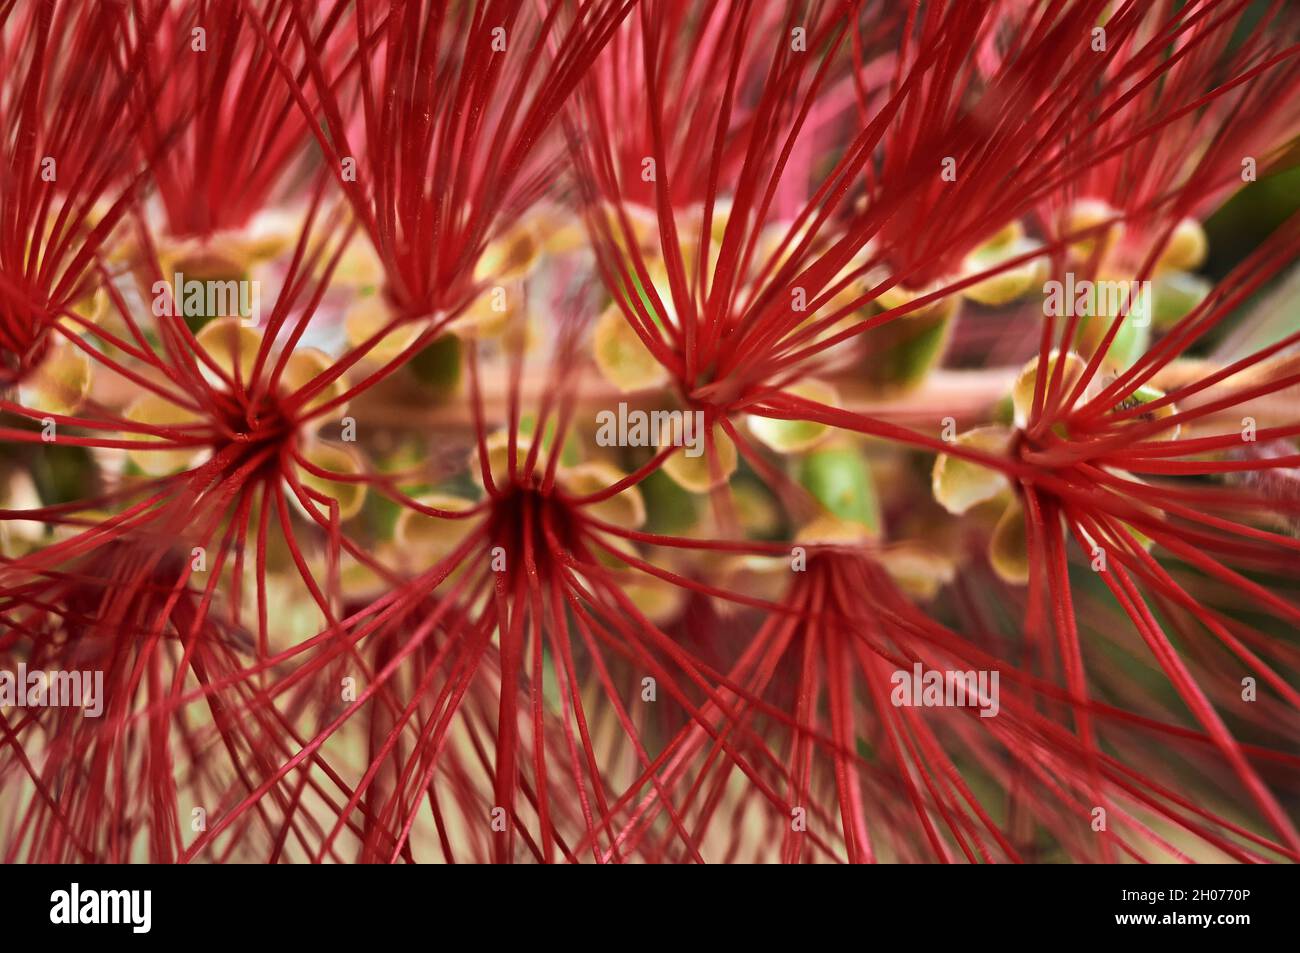 Callistemon or calistem, flower of the shrub of the Myrtaceae family, commonly called tube cleaner, bottle cleaner or brush because of its shape Stock Photo